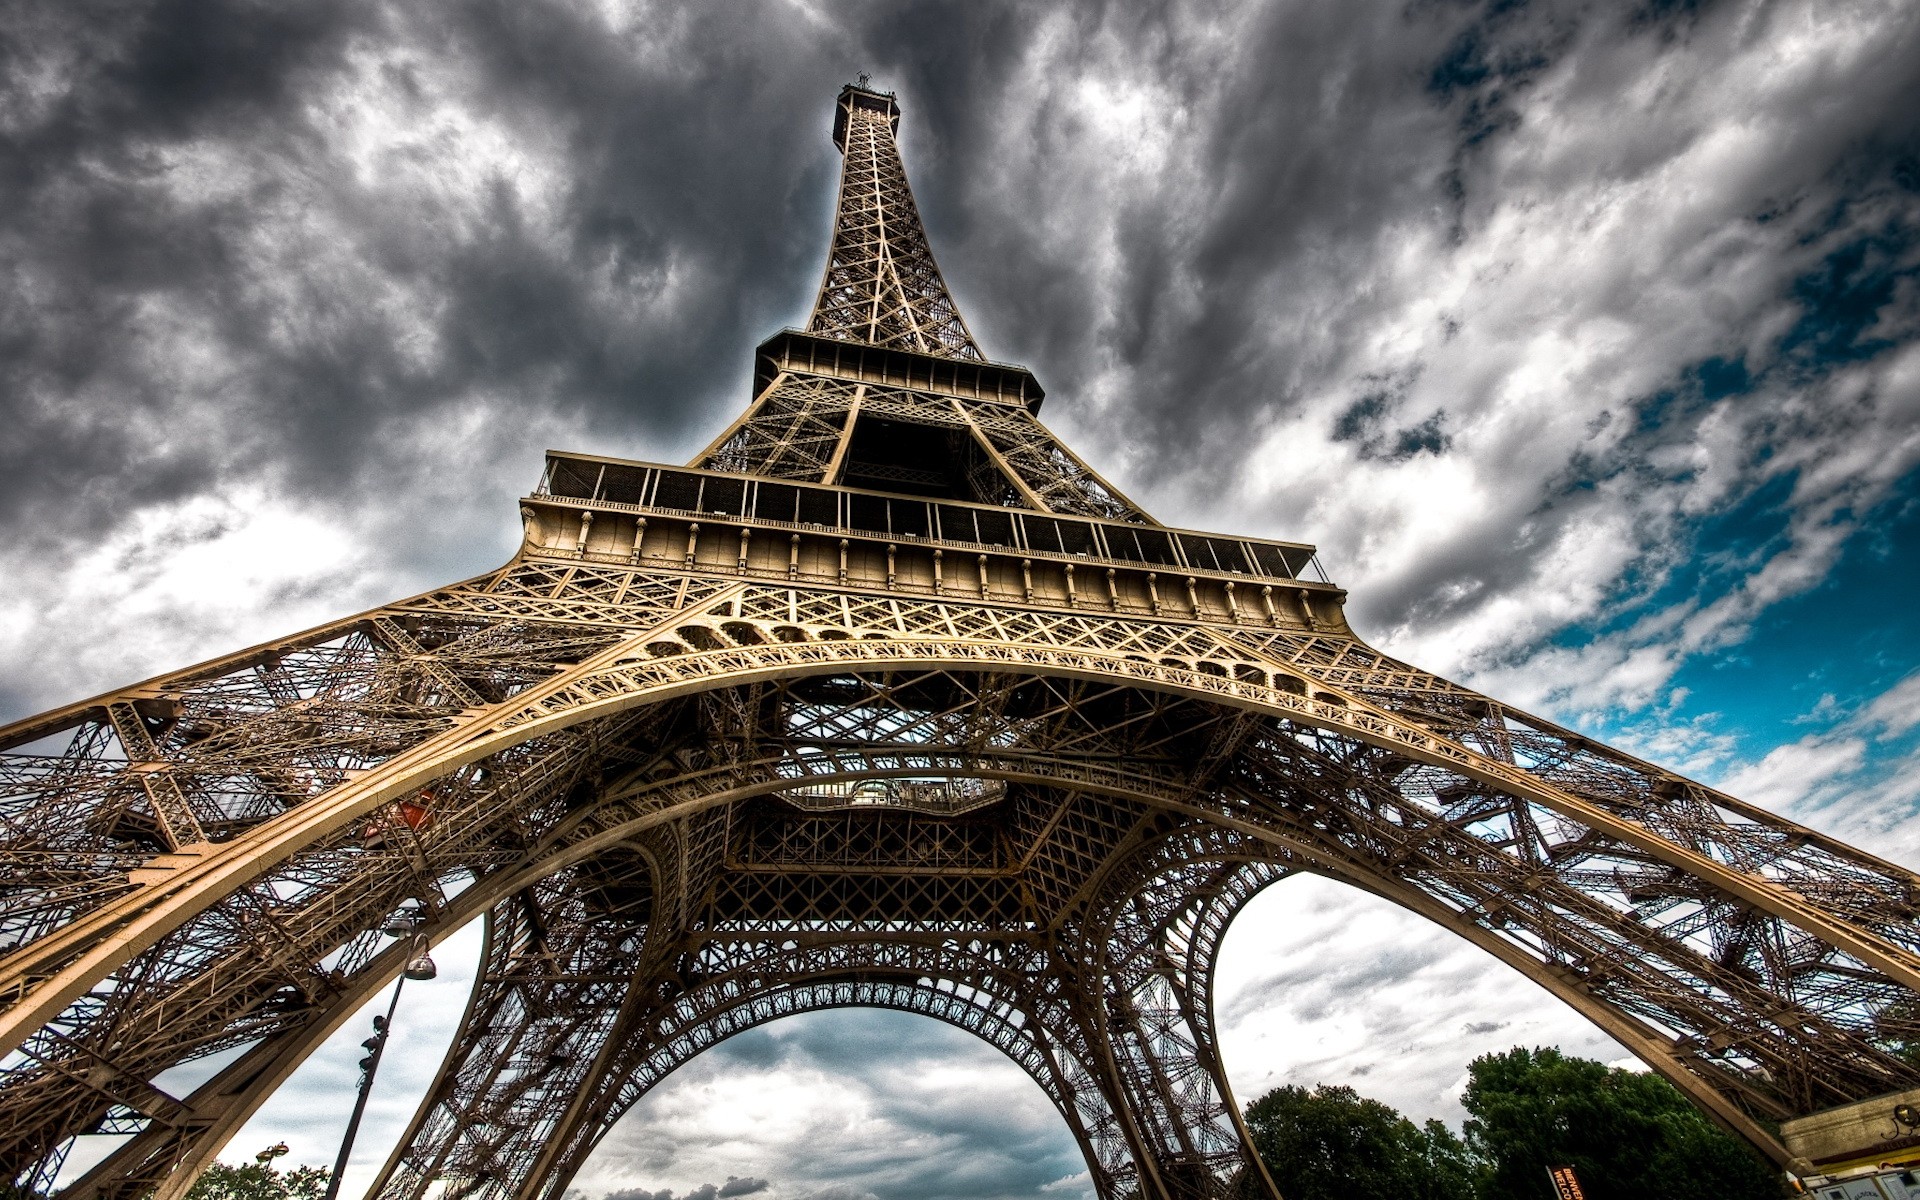 General 1920x1200 Paris France Eiffel Tower low-angle construction HDR sky worm's eye view architecture landmark Europe